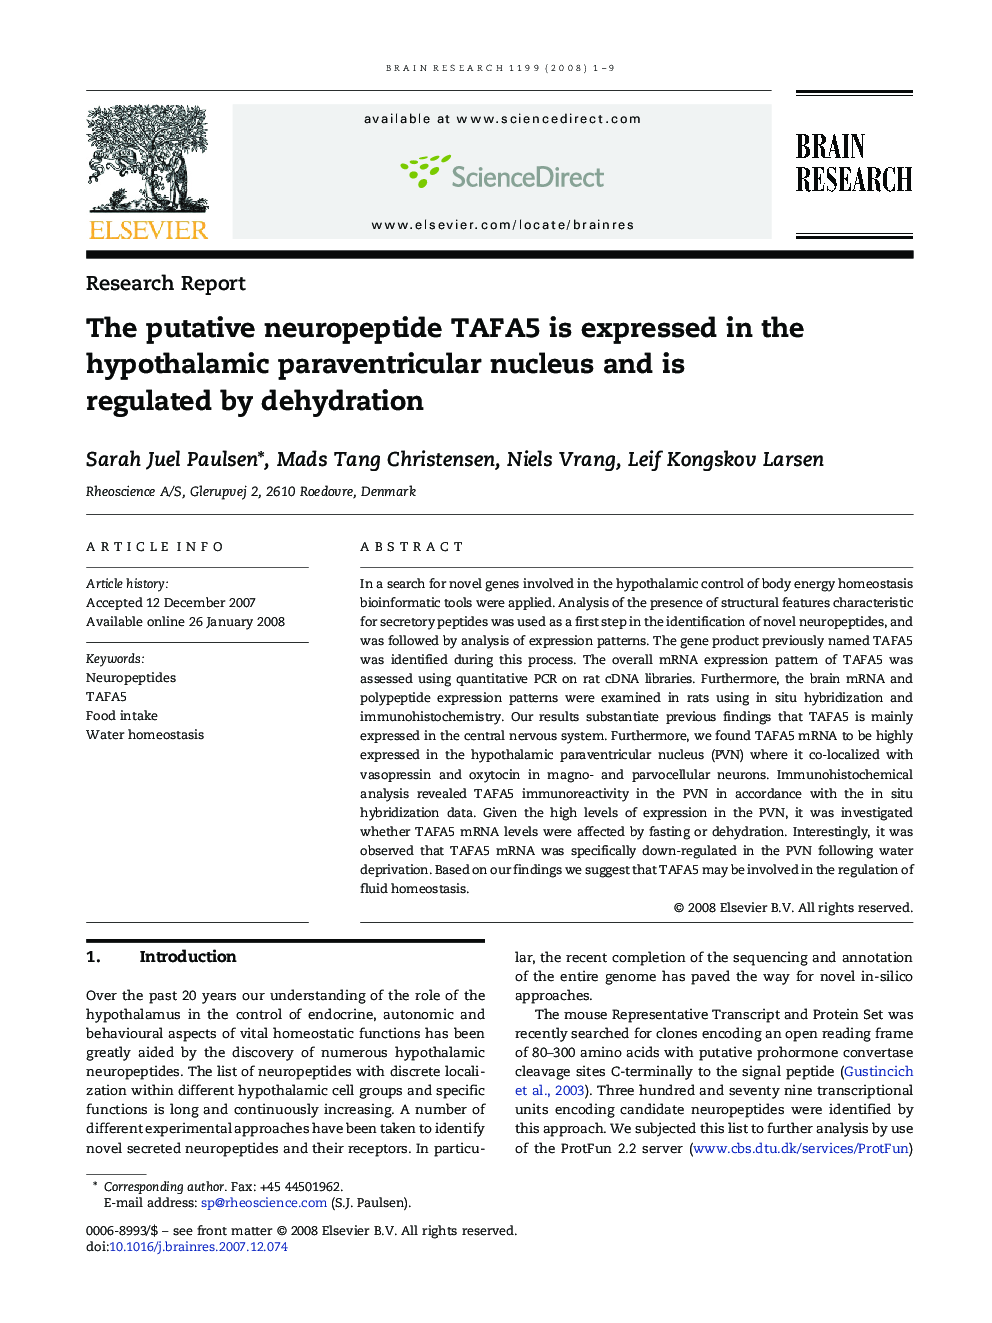 The putative neuropeptide TAFA5 is expressed in the hypothalamic paraventricular nucleus and is regulated by dehydration